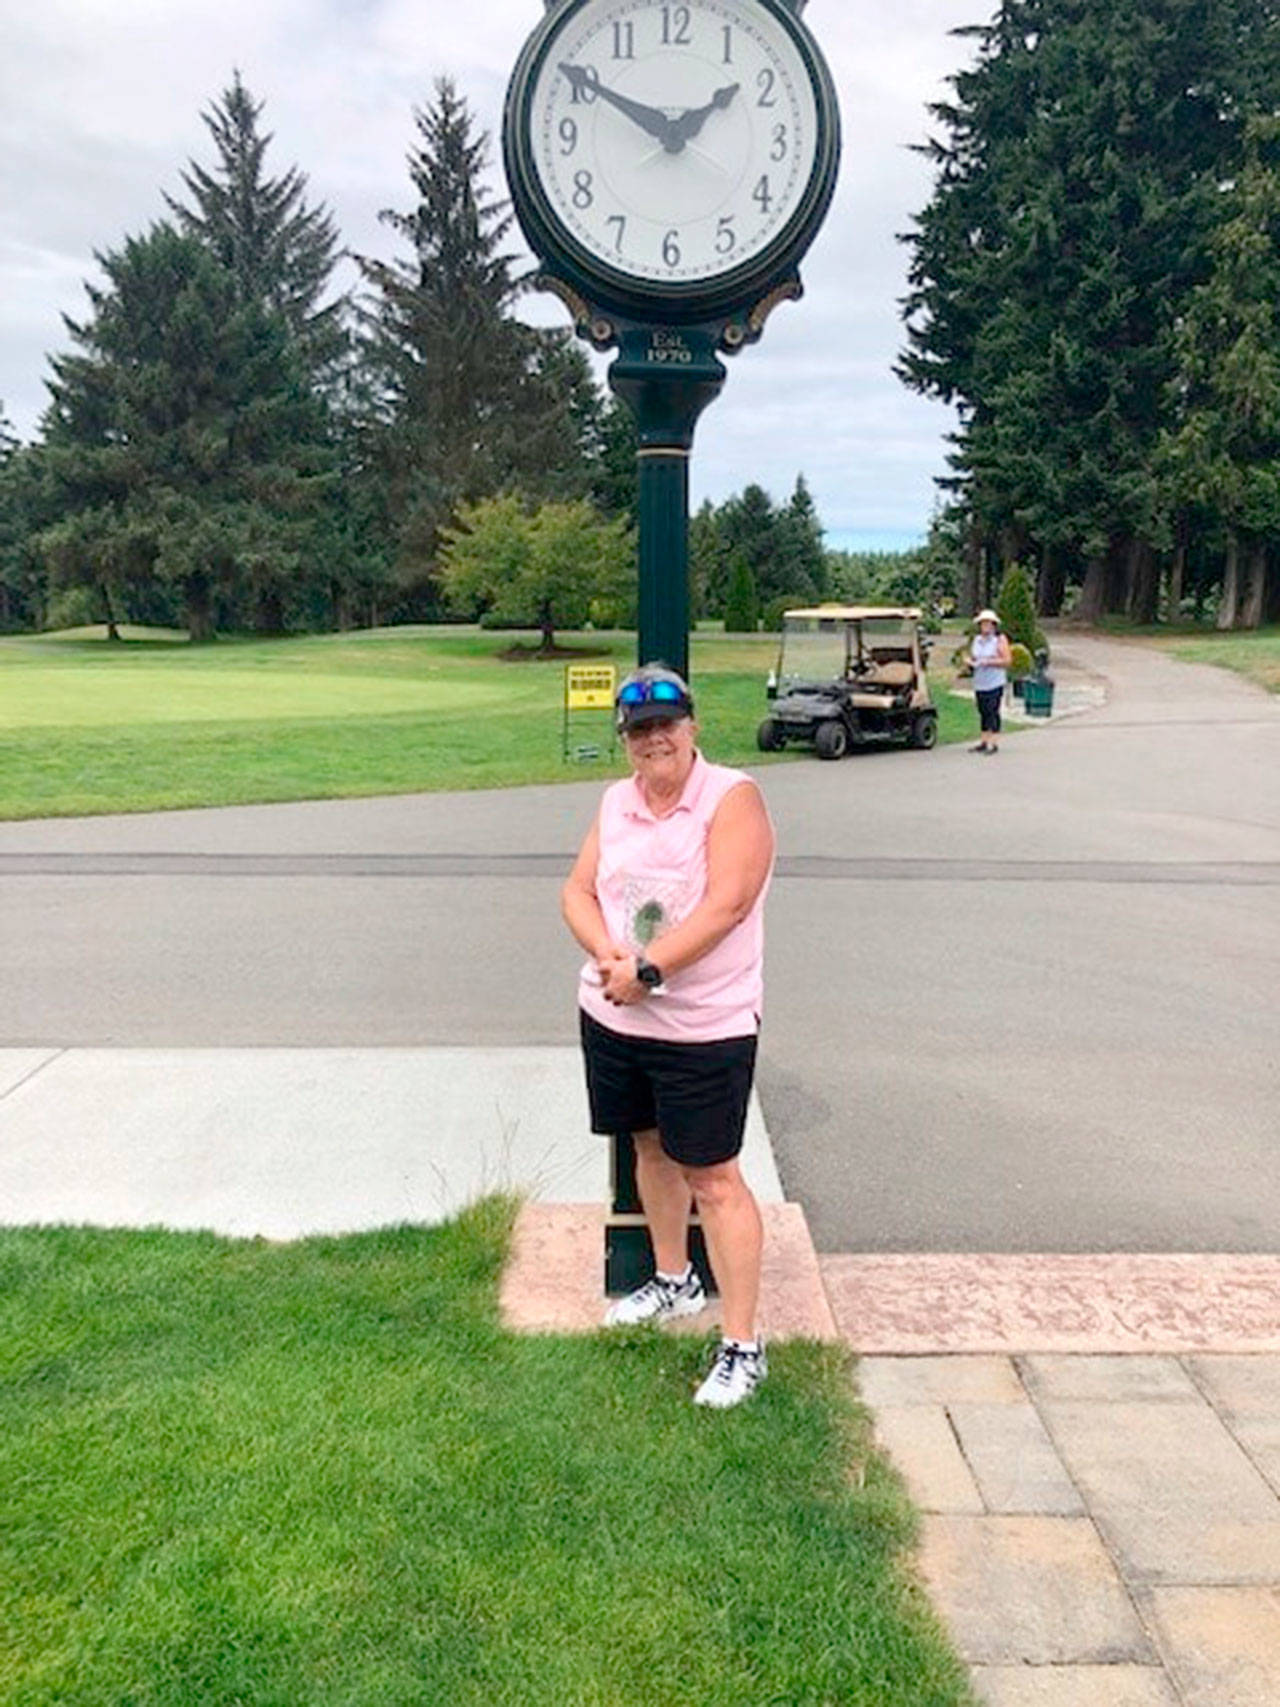 The Cedars at Dungeness Women’s Golf Association recently crowned Linda Case as its 2020 low gross champion. (Submitted photo)